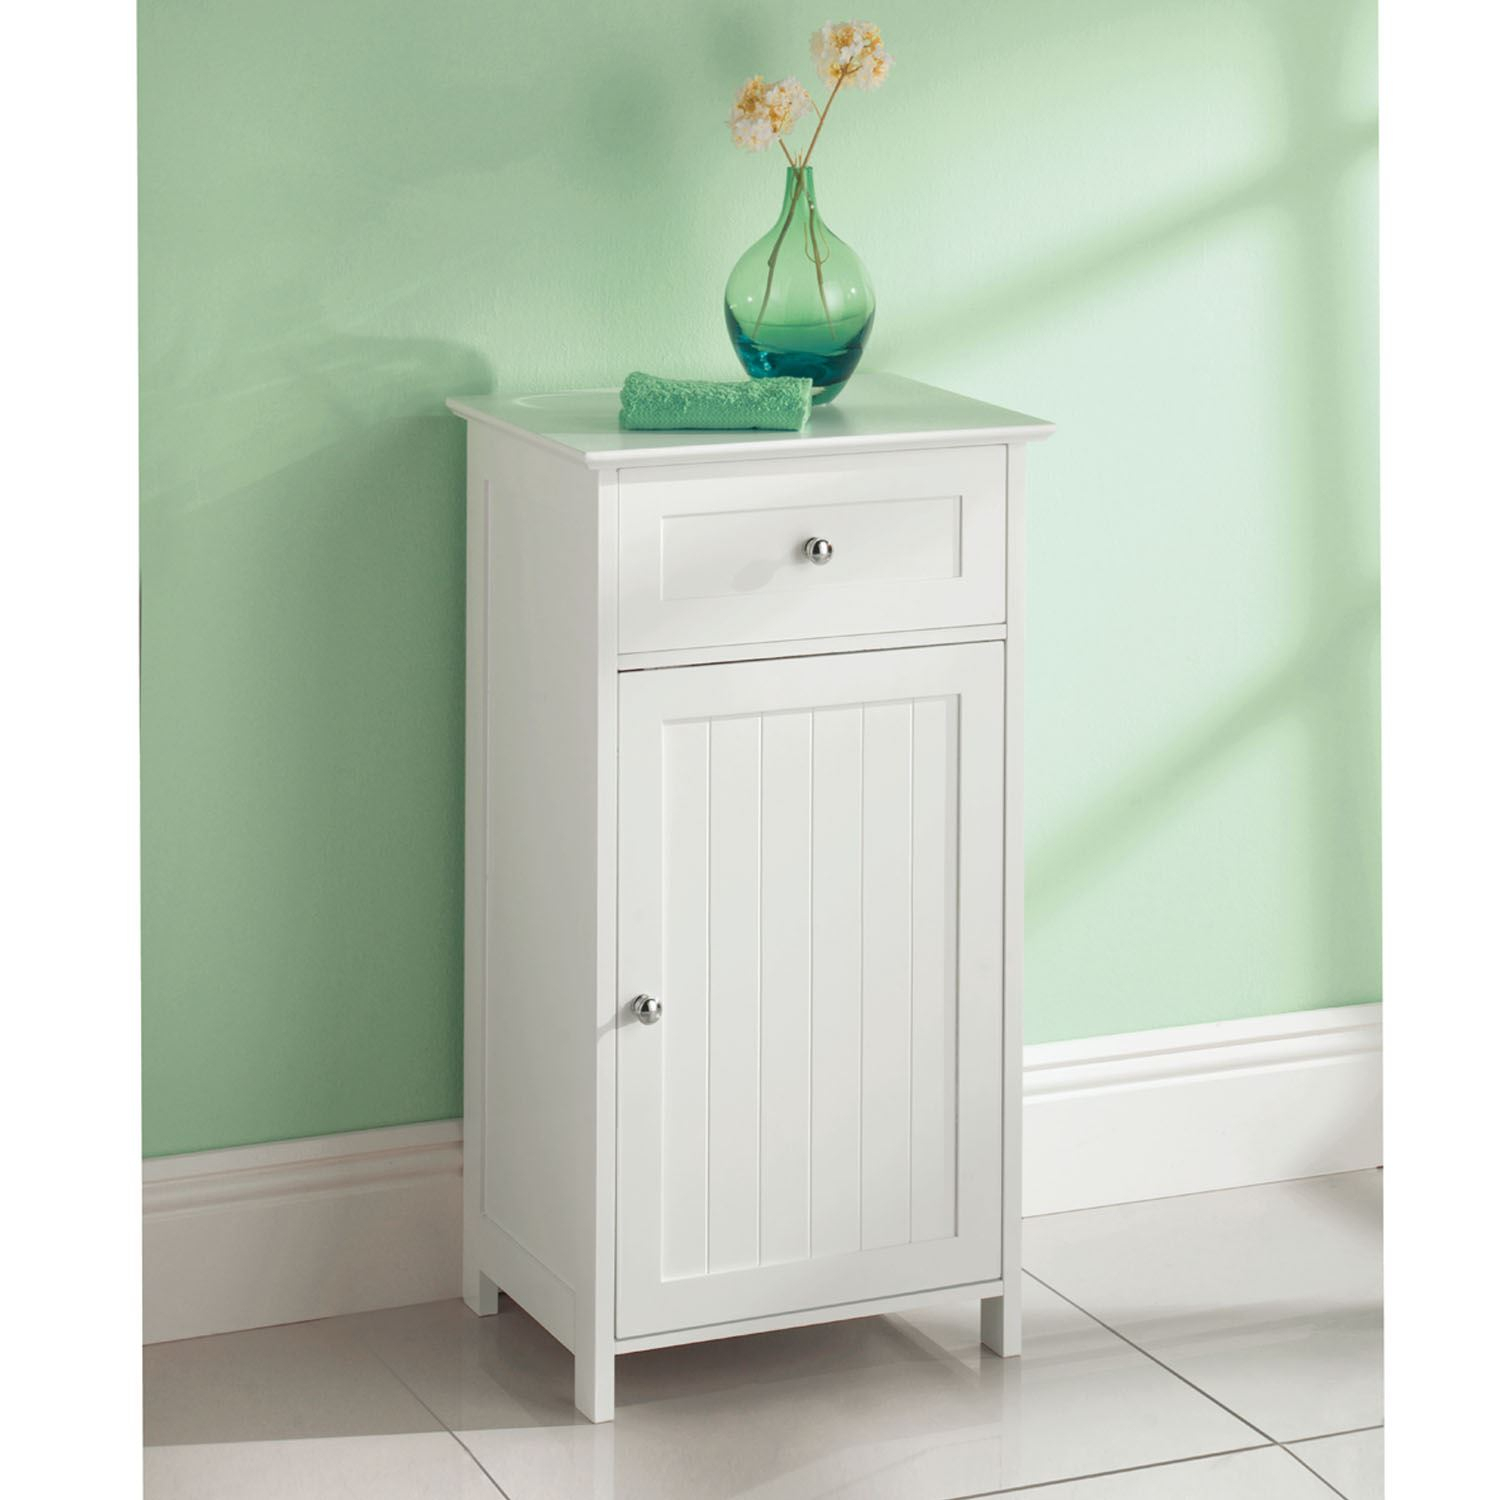 Freestanding Bathroom Cabinet White Cabinet Ideas within sizing 1500 X 1500